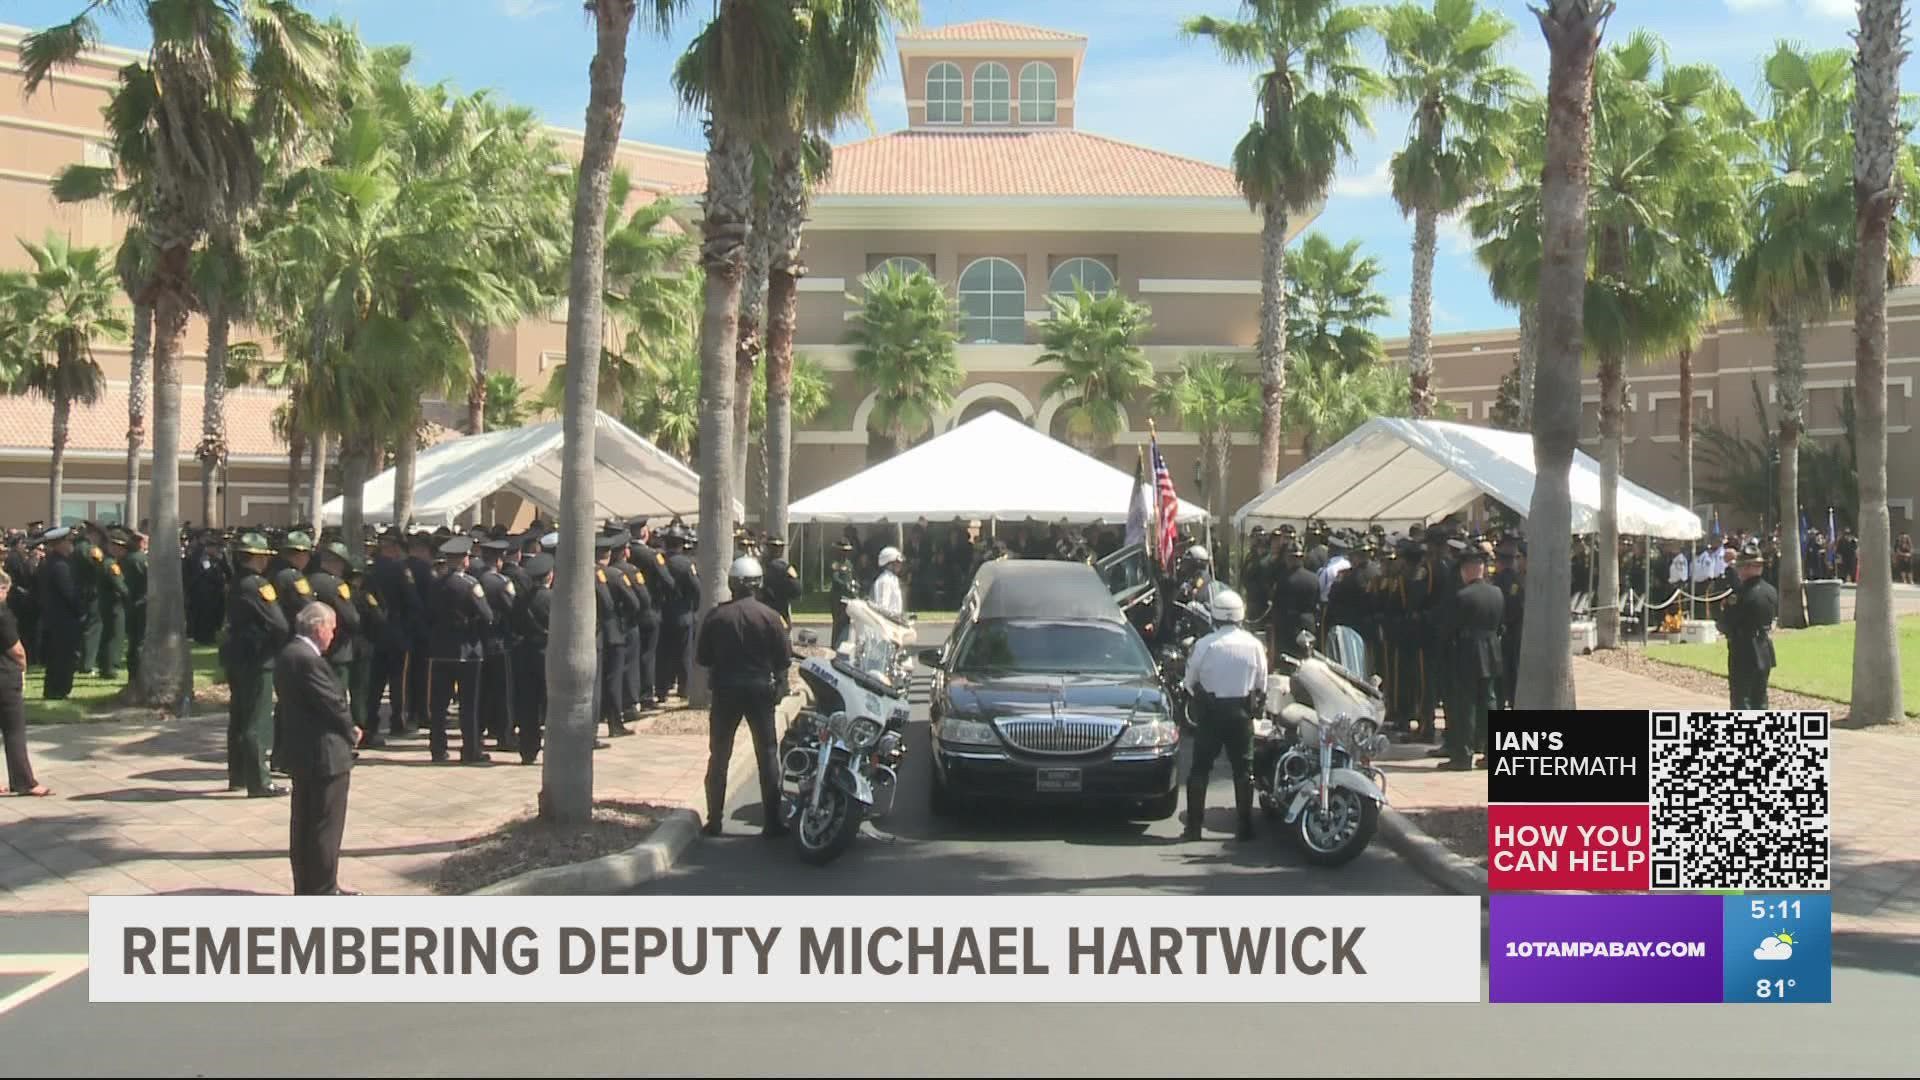 The funeral service was followed by a 21-gun salute, a riderless horse, a last call and a fly-over.